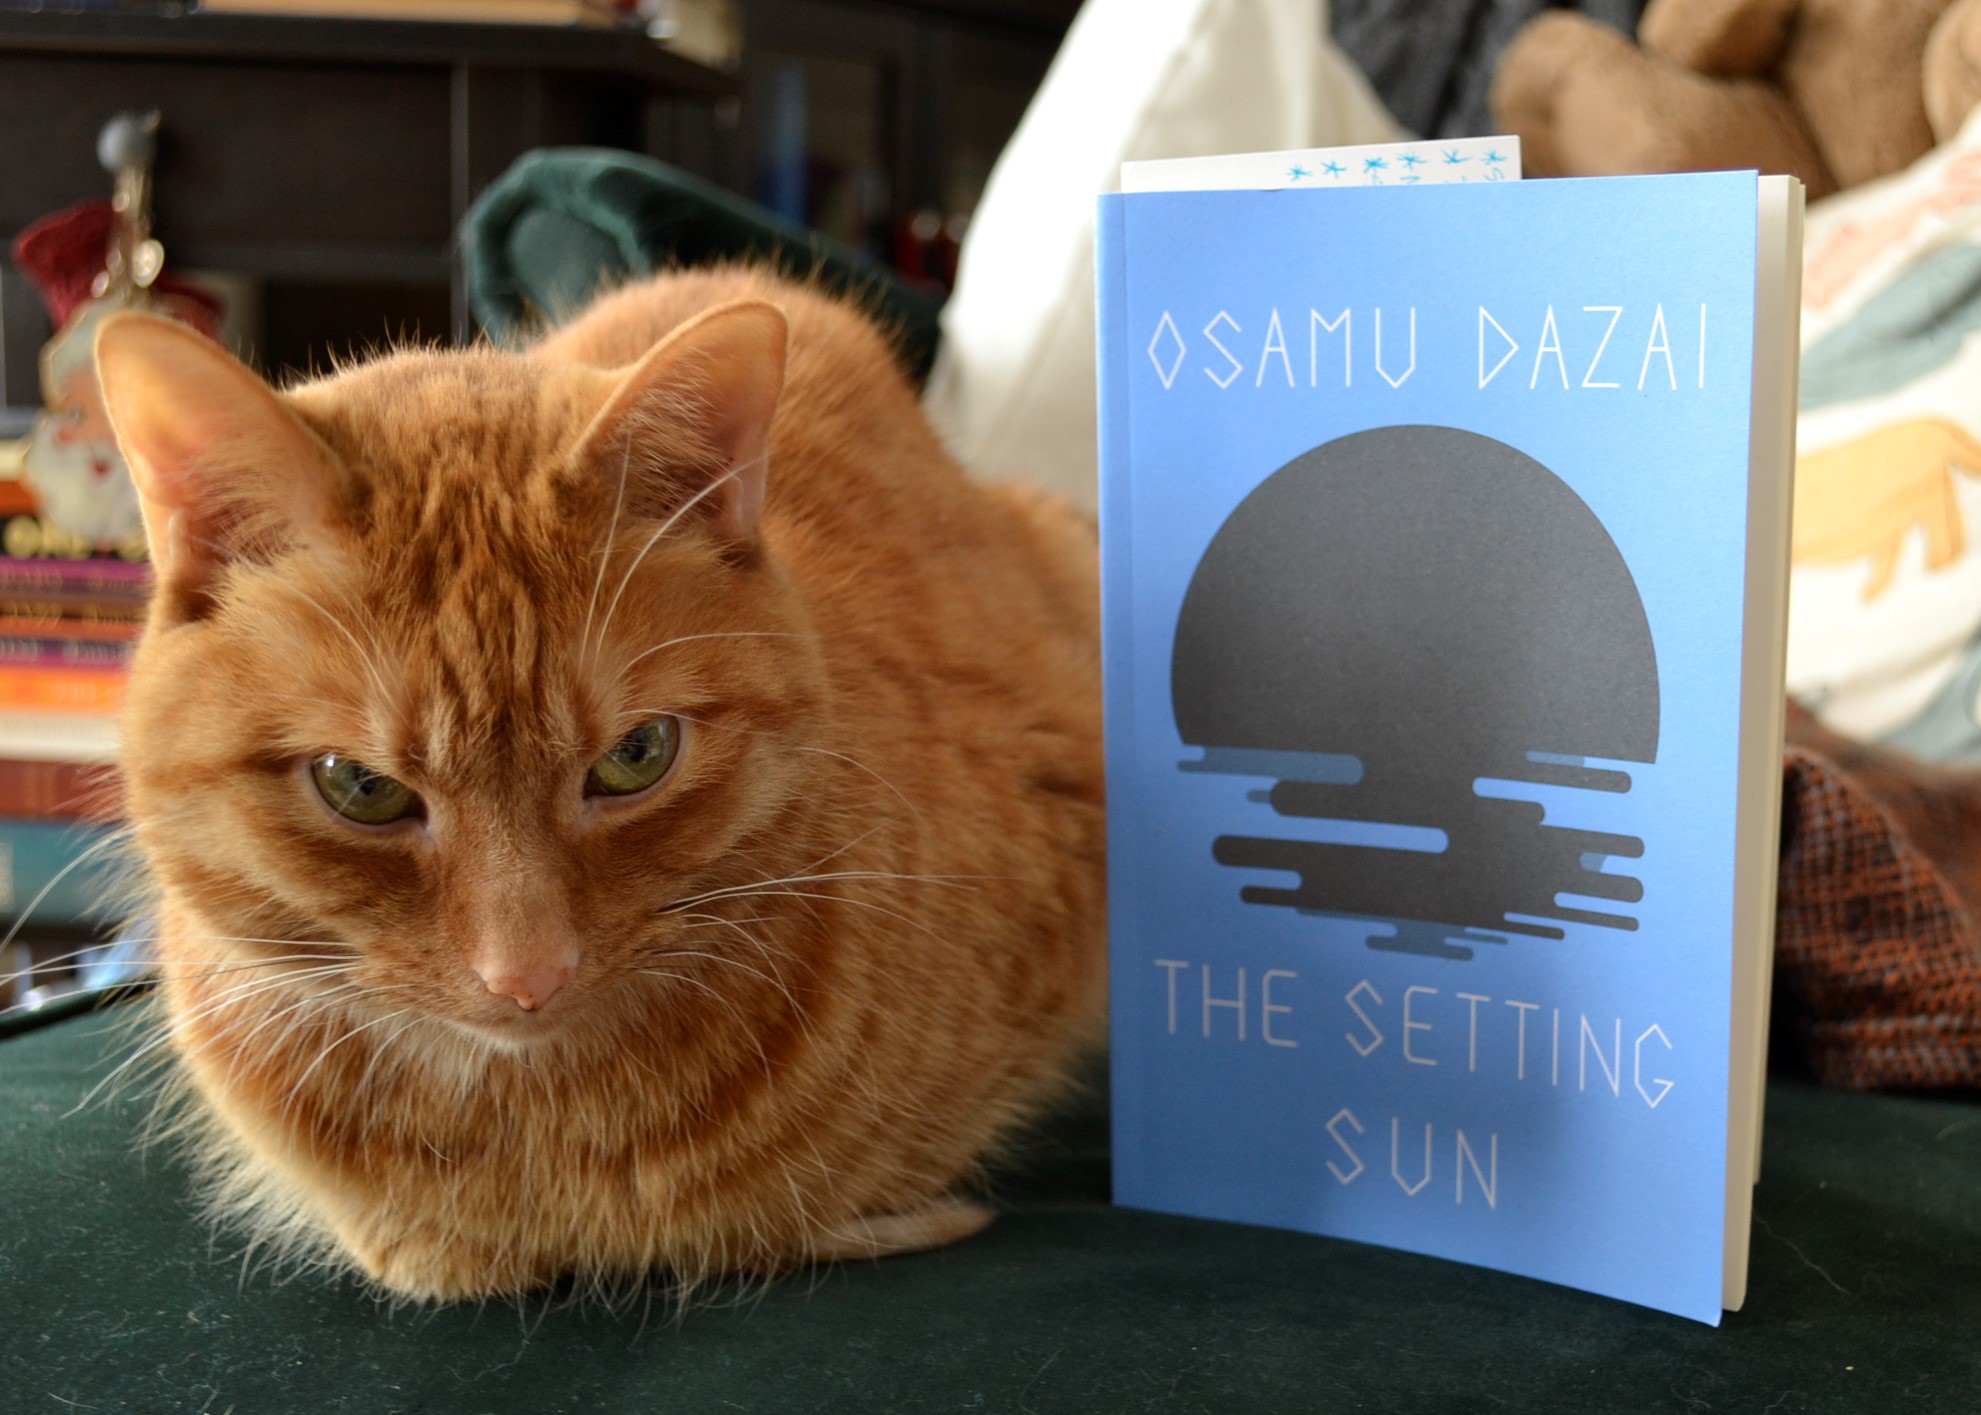 An orange cat looks at a blue book called The Setting Sun.